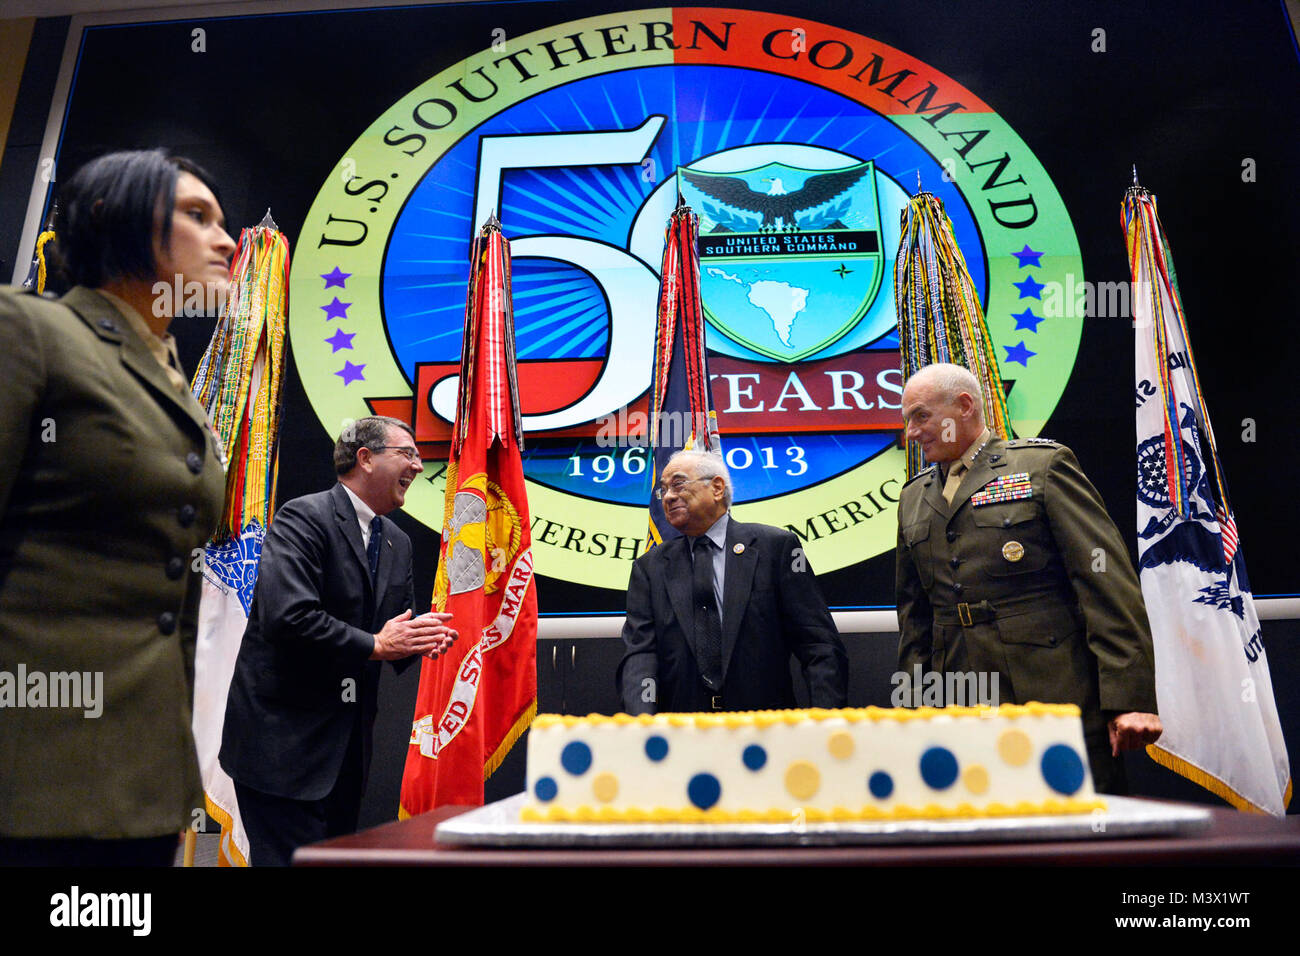 Deputy Secretary of Defense Ashton B. Carter and Gen. John F. Kelly, USMC, commander U.S. Southern Command, share a light moment with SOUTHCOM employee John Samson who was offered the first slice of a cake cut to mark  SOUTHCOM''s 50th anniversary ceremony at SOUTHCOM HQ in Miami, Fla., June 4, 2013. Samson received a letter of appreciation during the ceremony and has served over 50 years in government service, mostly for SOUTHCOM. DoD Photo By Glenn Fawcett (Released) 130604-D-NI589-229 by ussouthcom Stock Photo